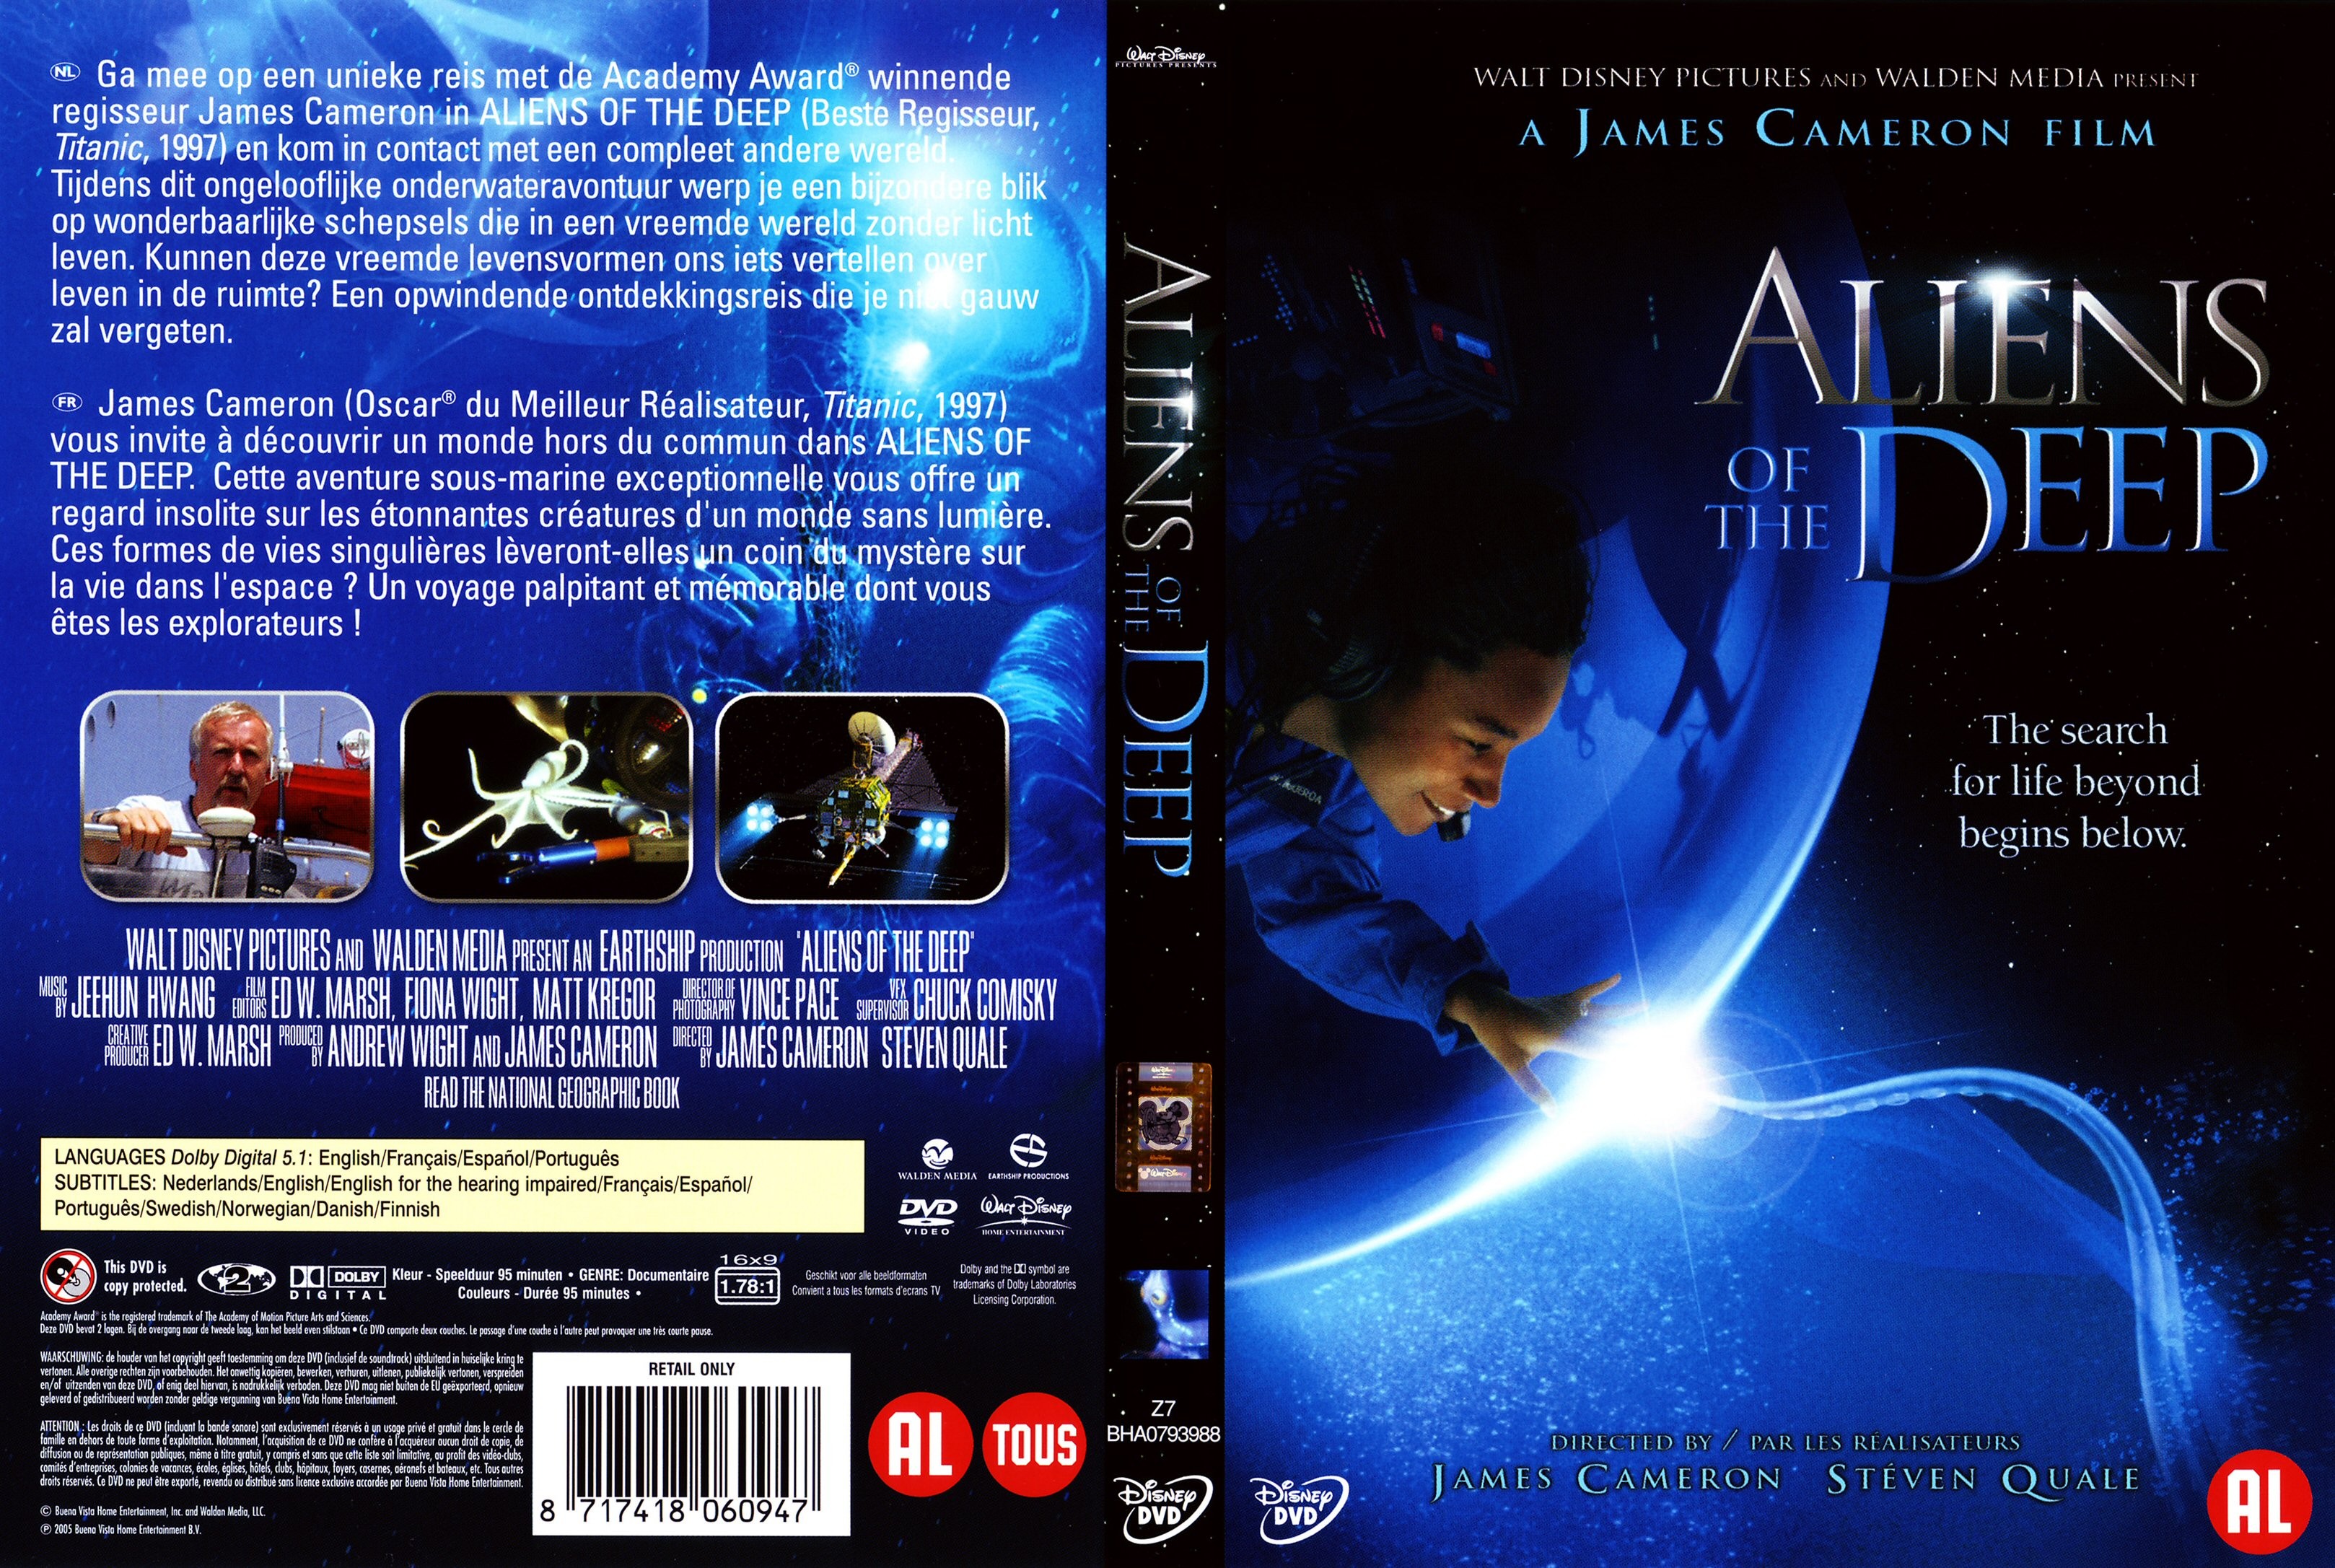 Jaquette DVD Aliens of the deep